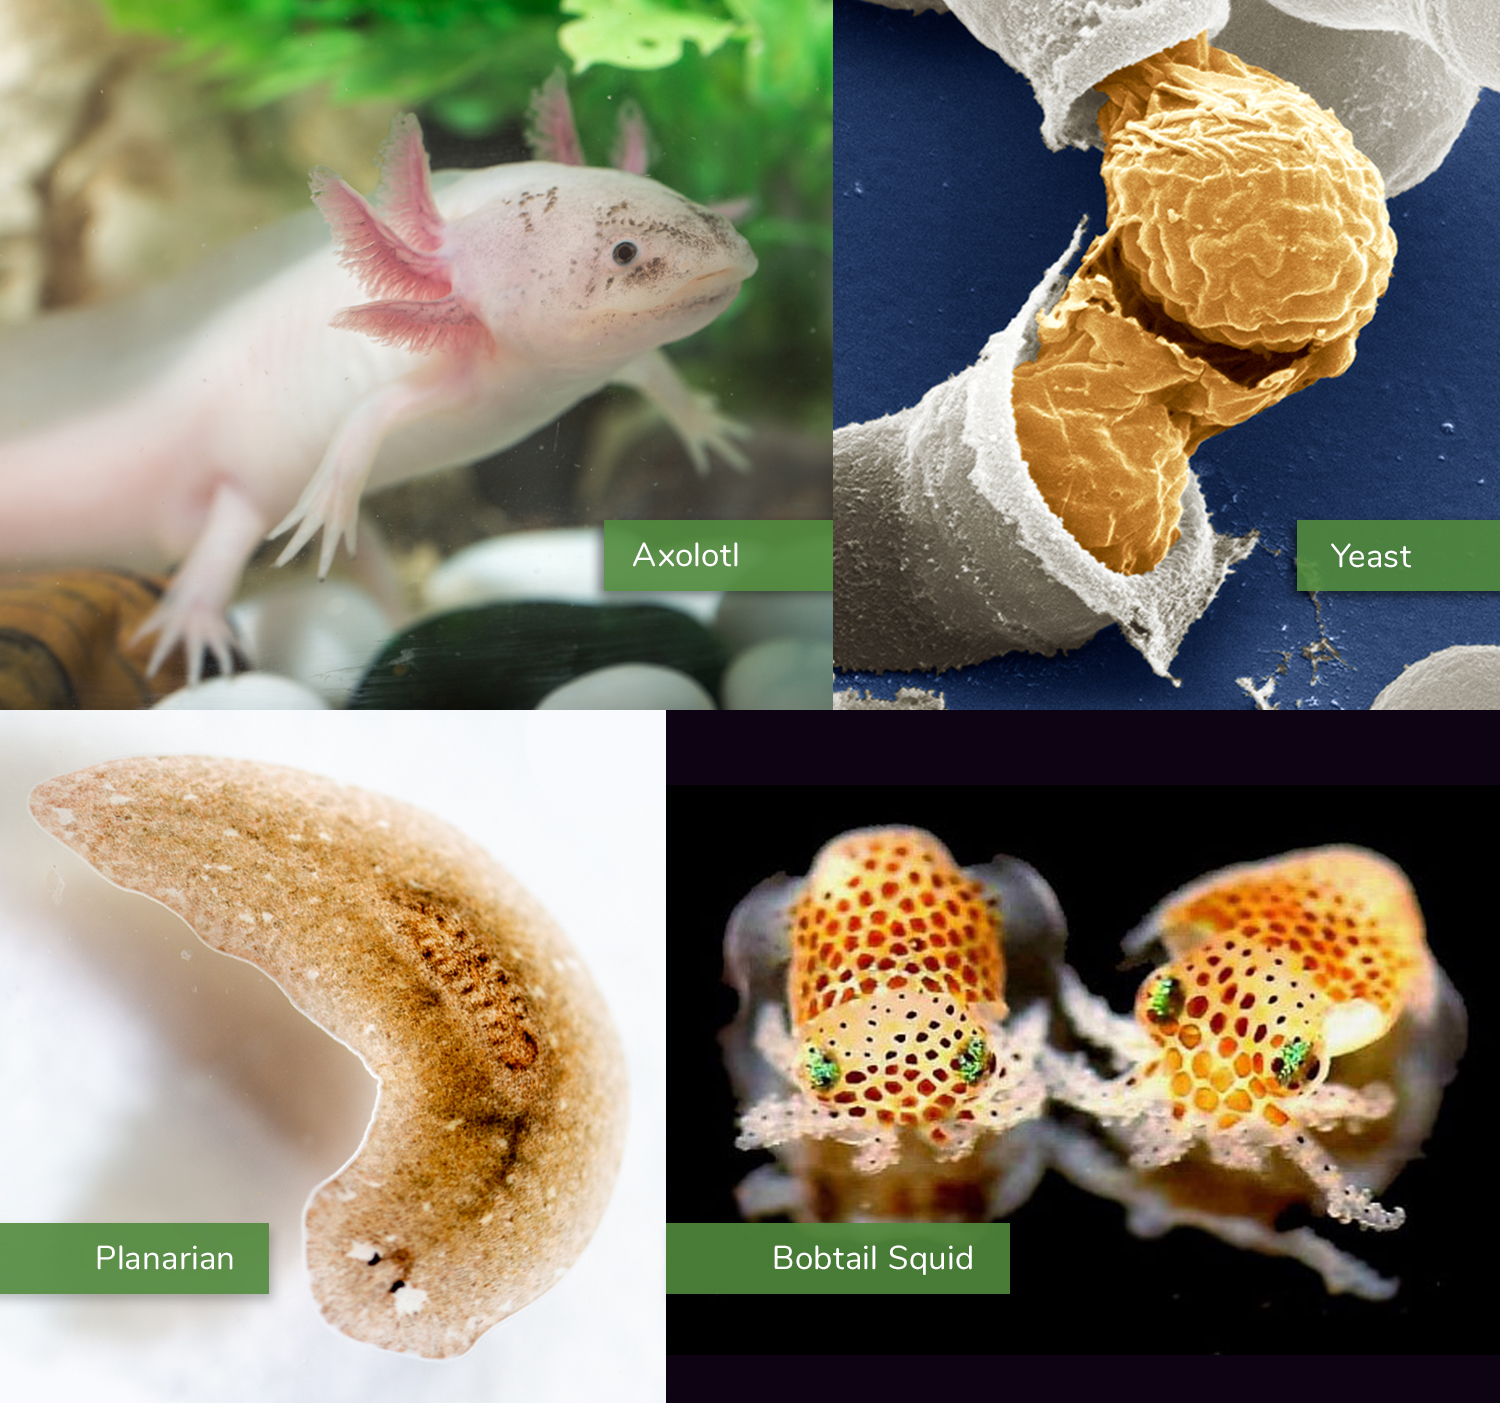 Among the research organisms discussed at the NIGMS workshop last September are (clockwise): Ambystoma mexicanum (axolotl, credit: iStock), Saccharomyces cerevisiae (yeast, credit: see NIGMS Image and Video Gallery), Euprymna scolopes (bobtail squid, credit: Dr. Satoshi Shibata), and Platyhelminthes (planarian, credit: iStock).